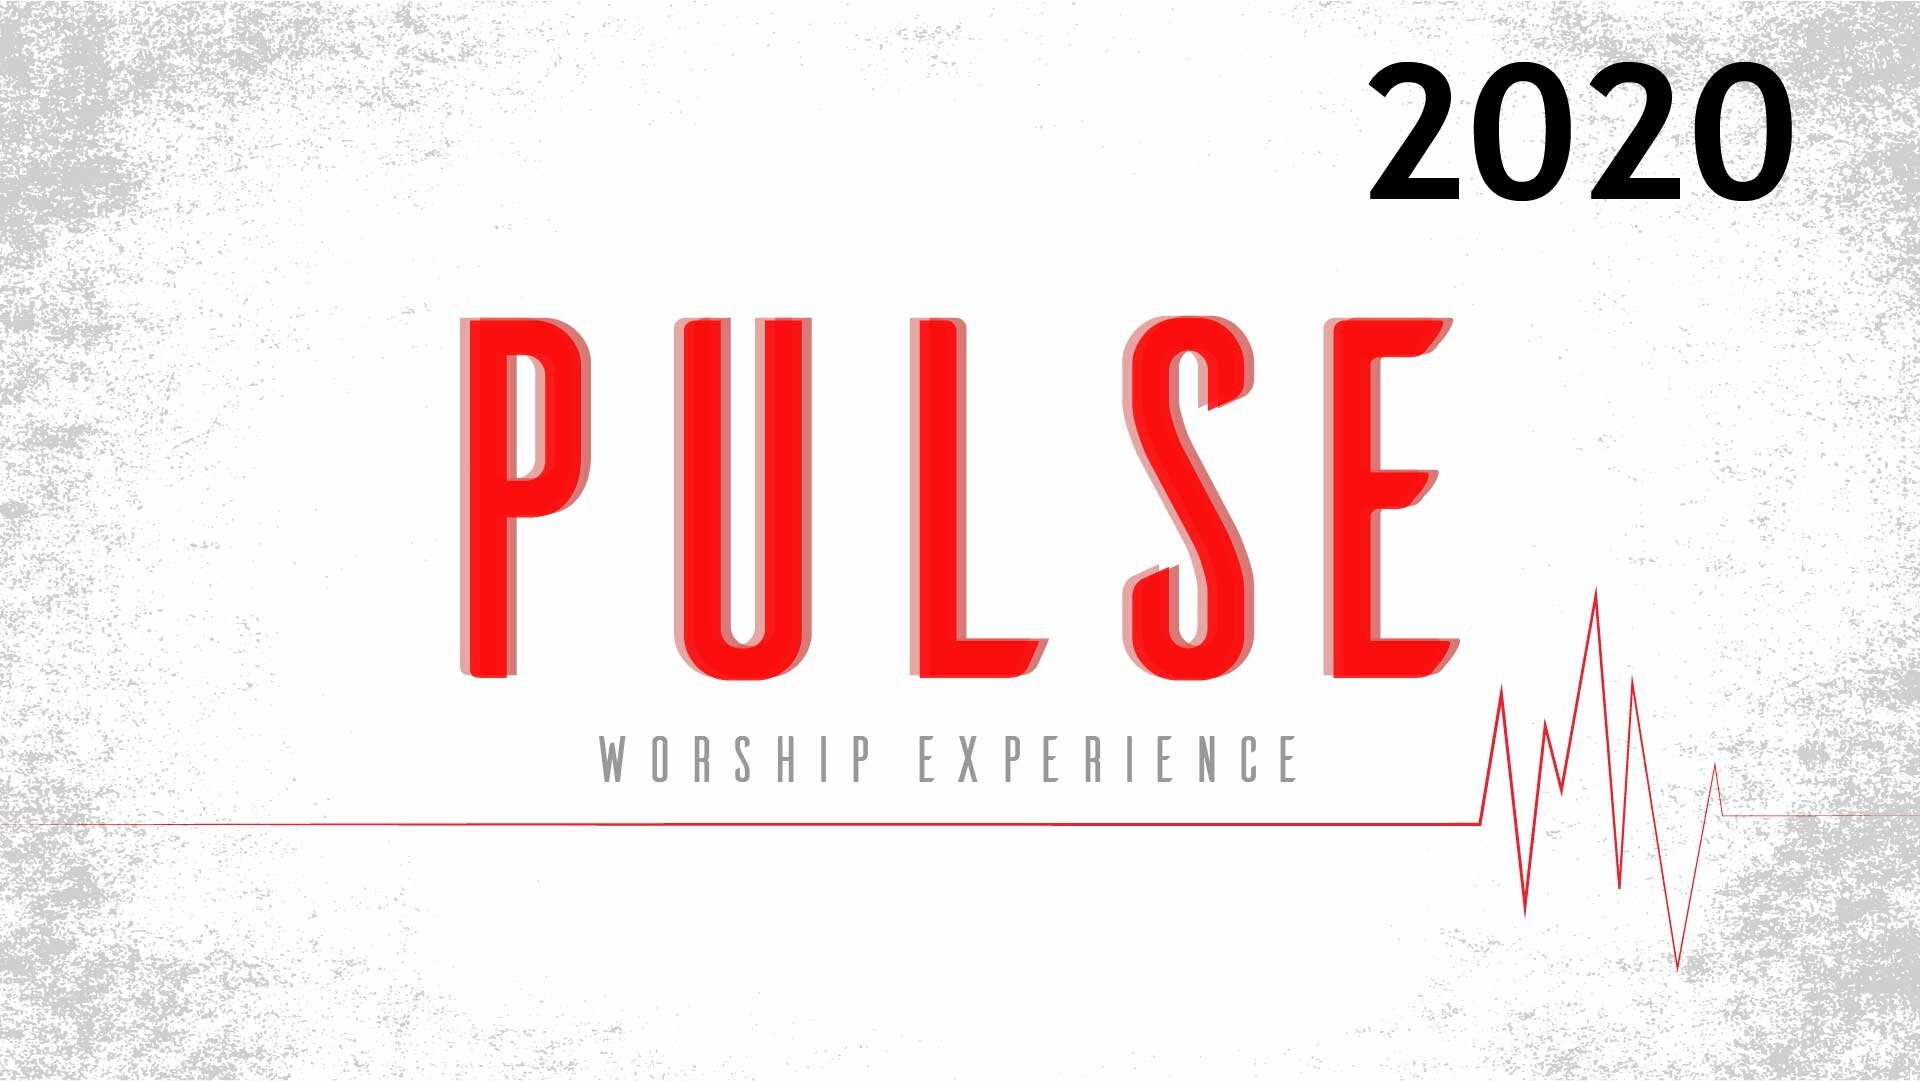 White background with a red electrocardiogram spanning it's width. It says 'Pulse worship experience 2020' in the middle